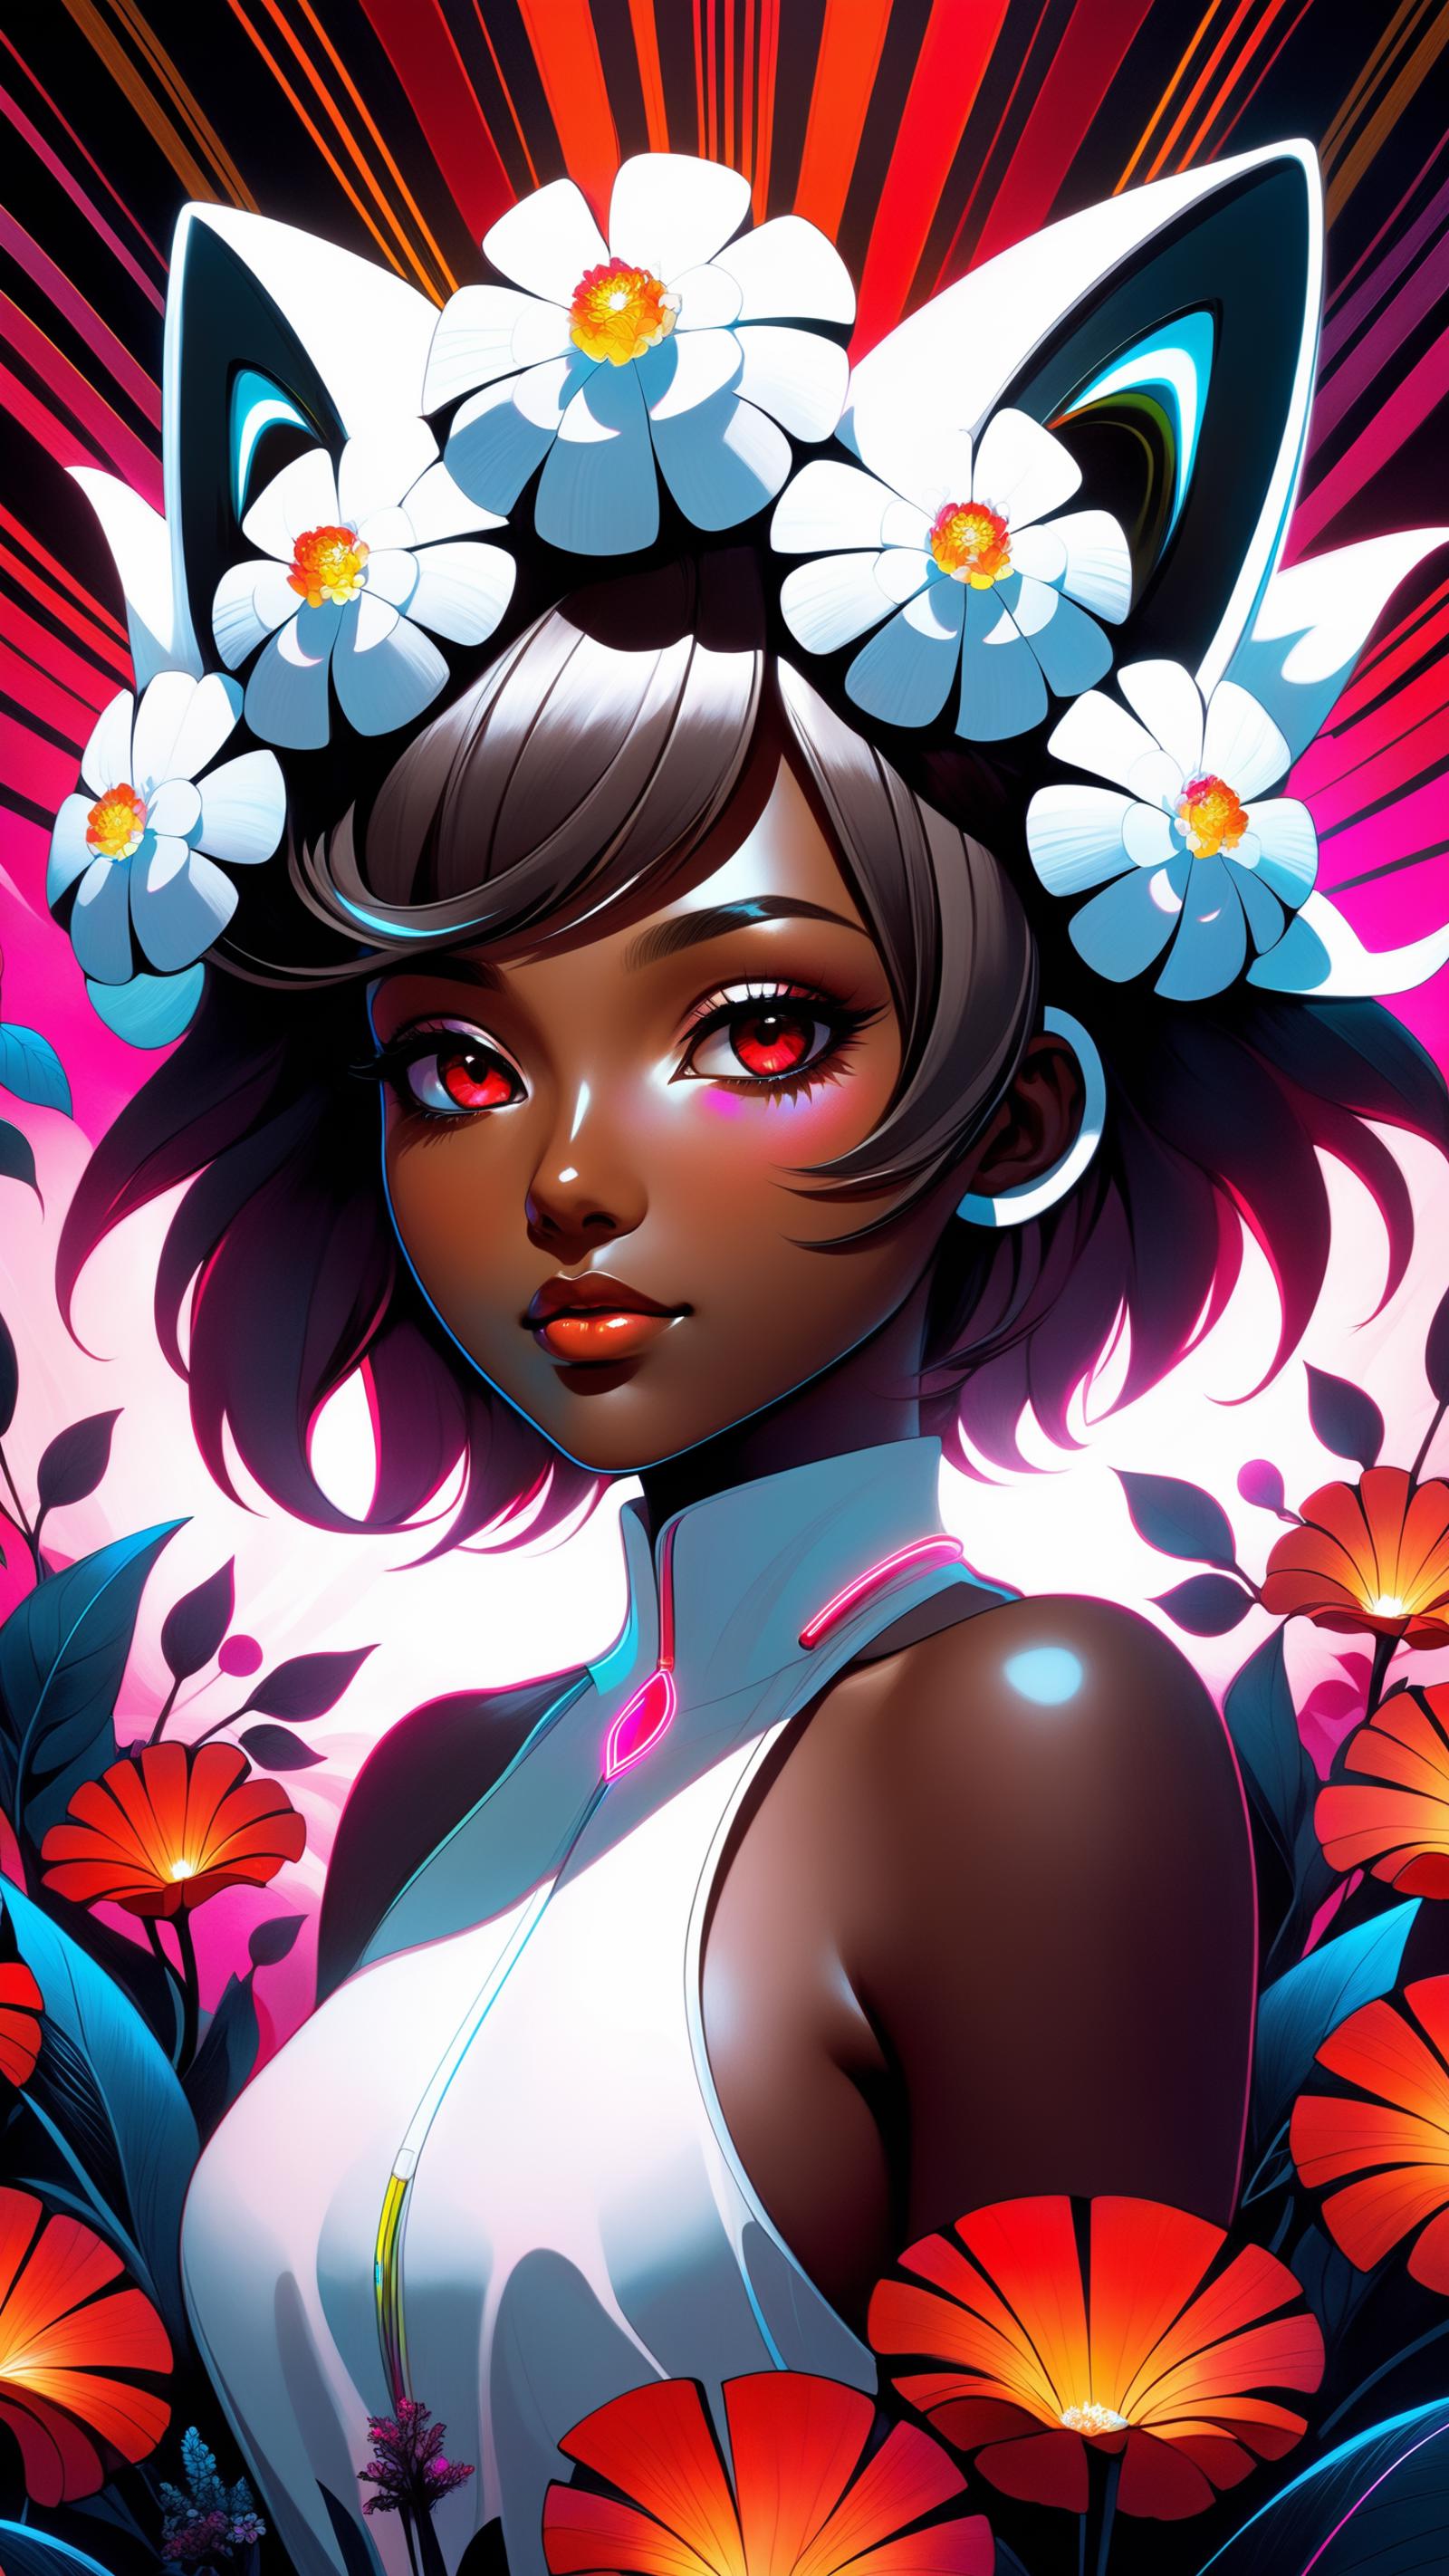 A beautifully illustrated black woman with red eyes and pink lips, wearing a white dress and white flowers in her hair.